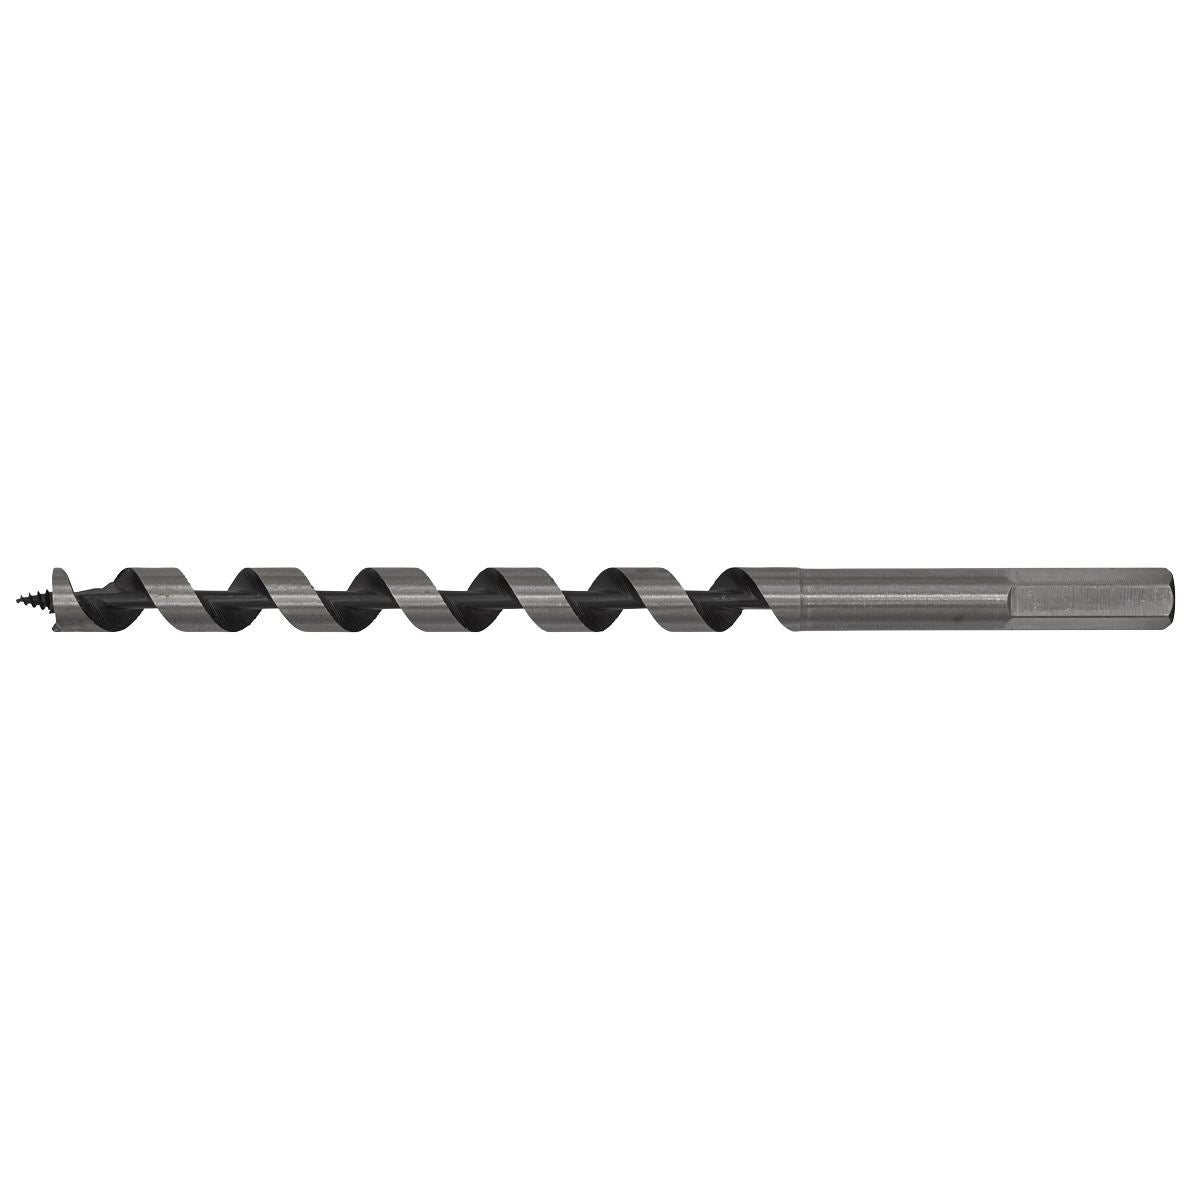 Worksafe by Sealey Auger Wood Drill Bit 13mm x 235mm